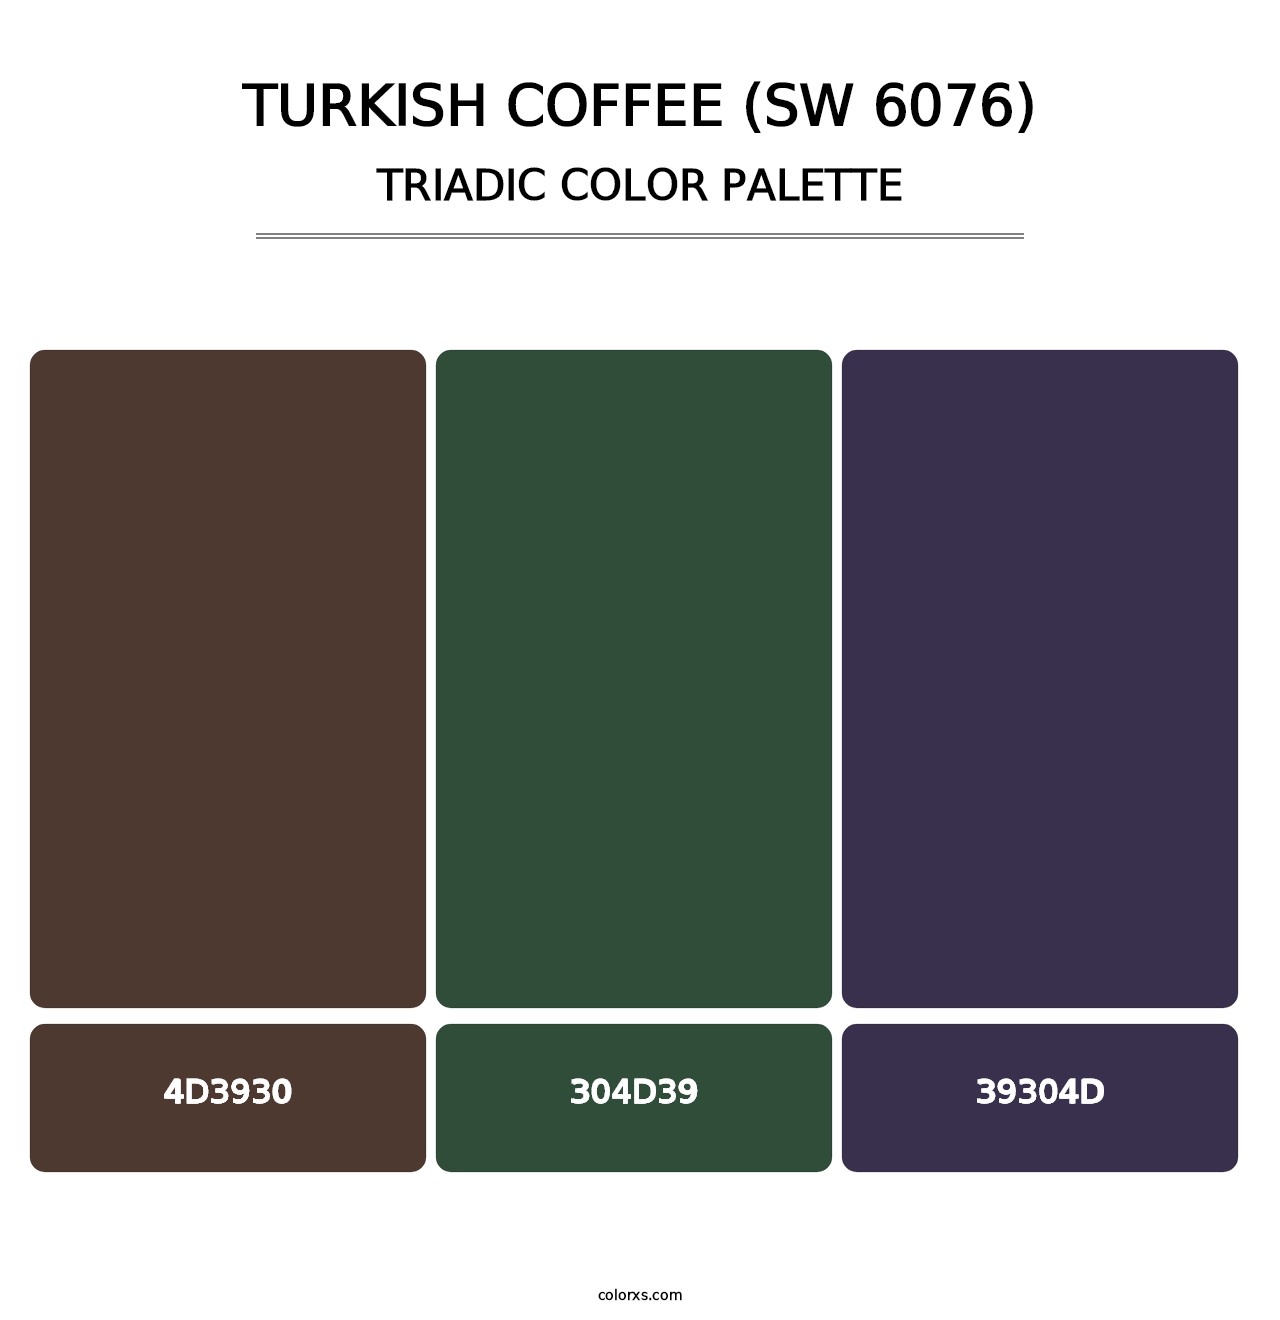 Turkish Coffee (SW 6076) - Triadic Color Palette